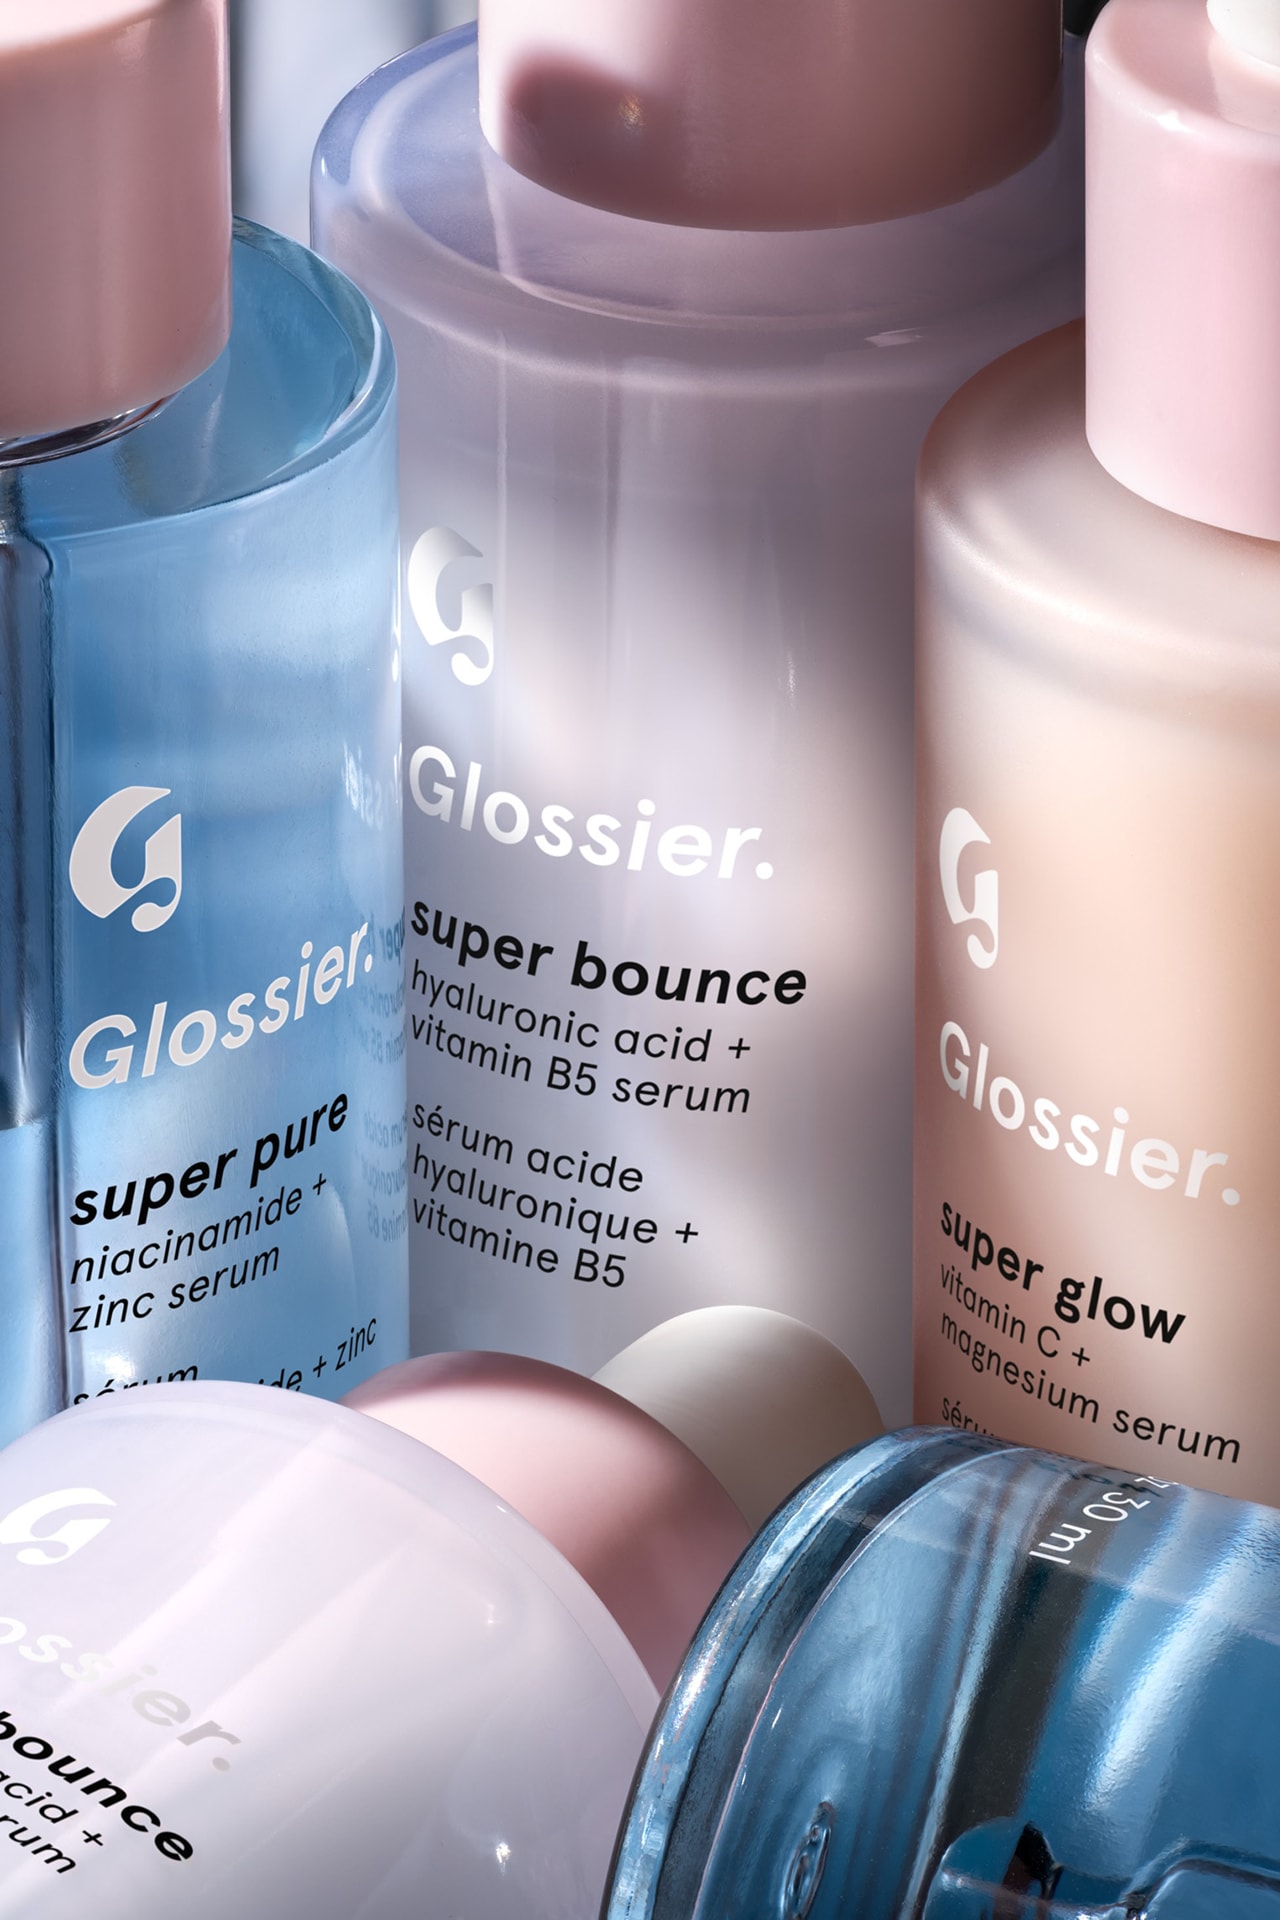 Glossier Supers Serums Super Bounce Pure Glow Bigger Bottles Packaging Beauty Skincare Emily Weiss Dropper Cosmetics Blue Purple Orange Pink